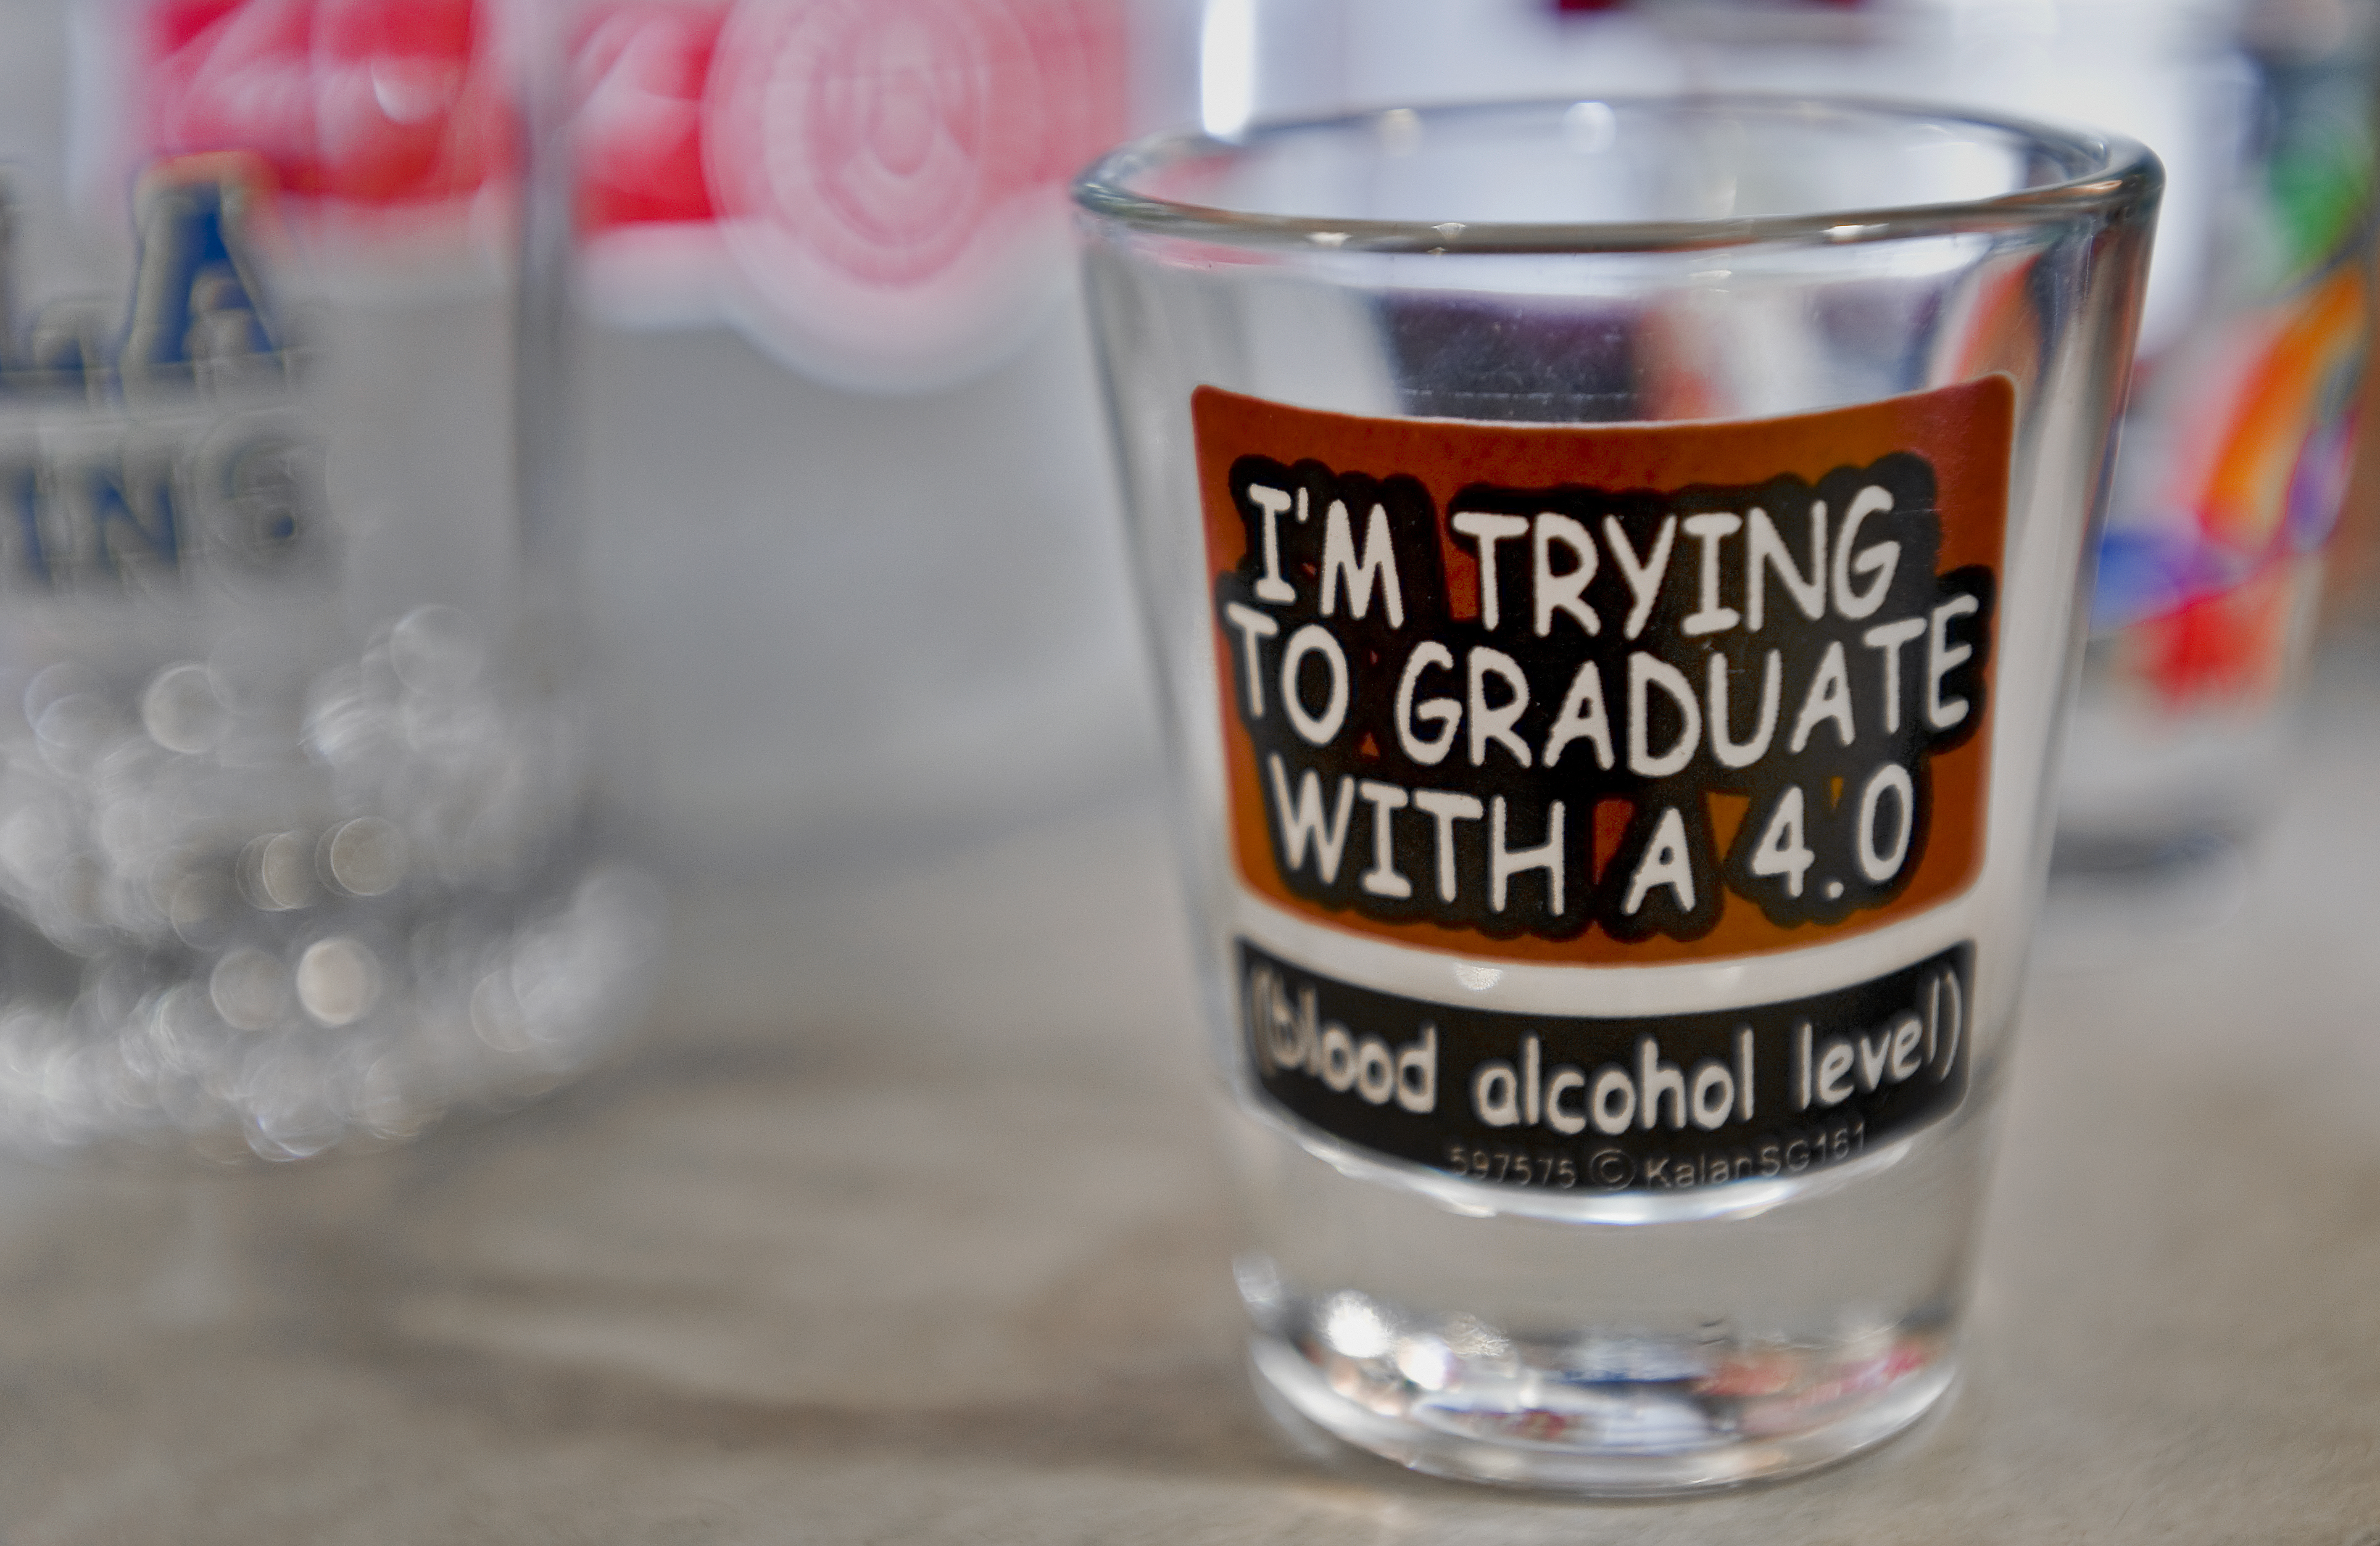 alcoholism on college campuses